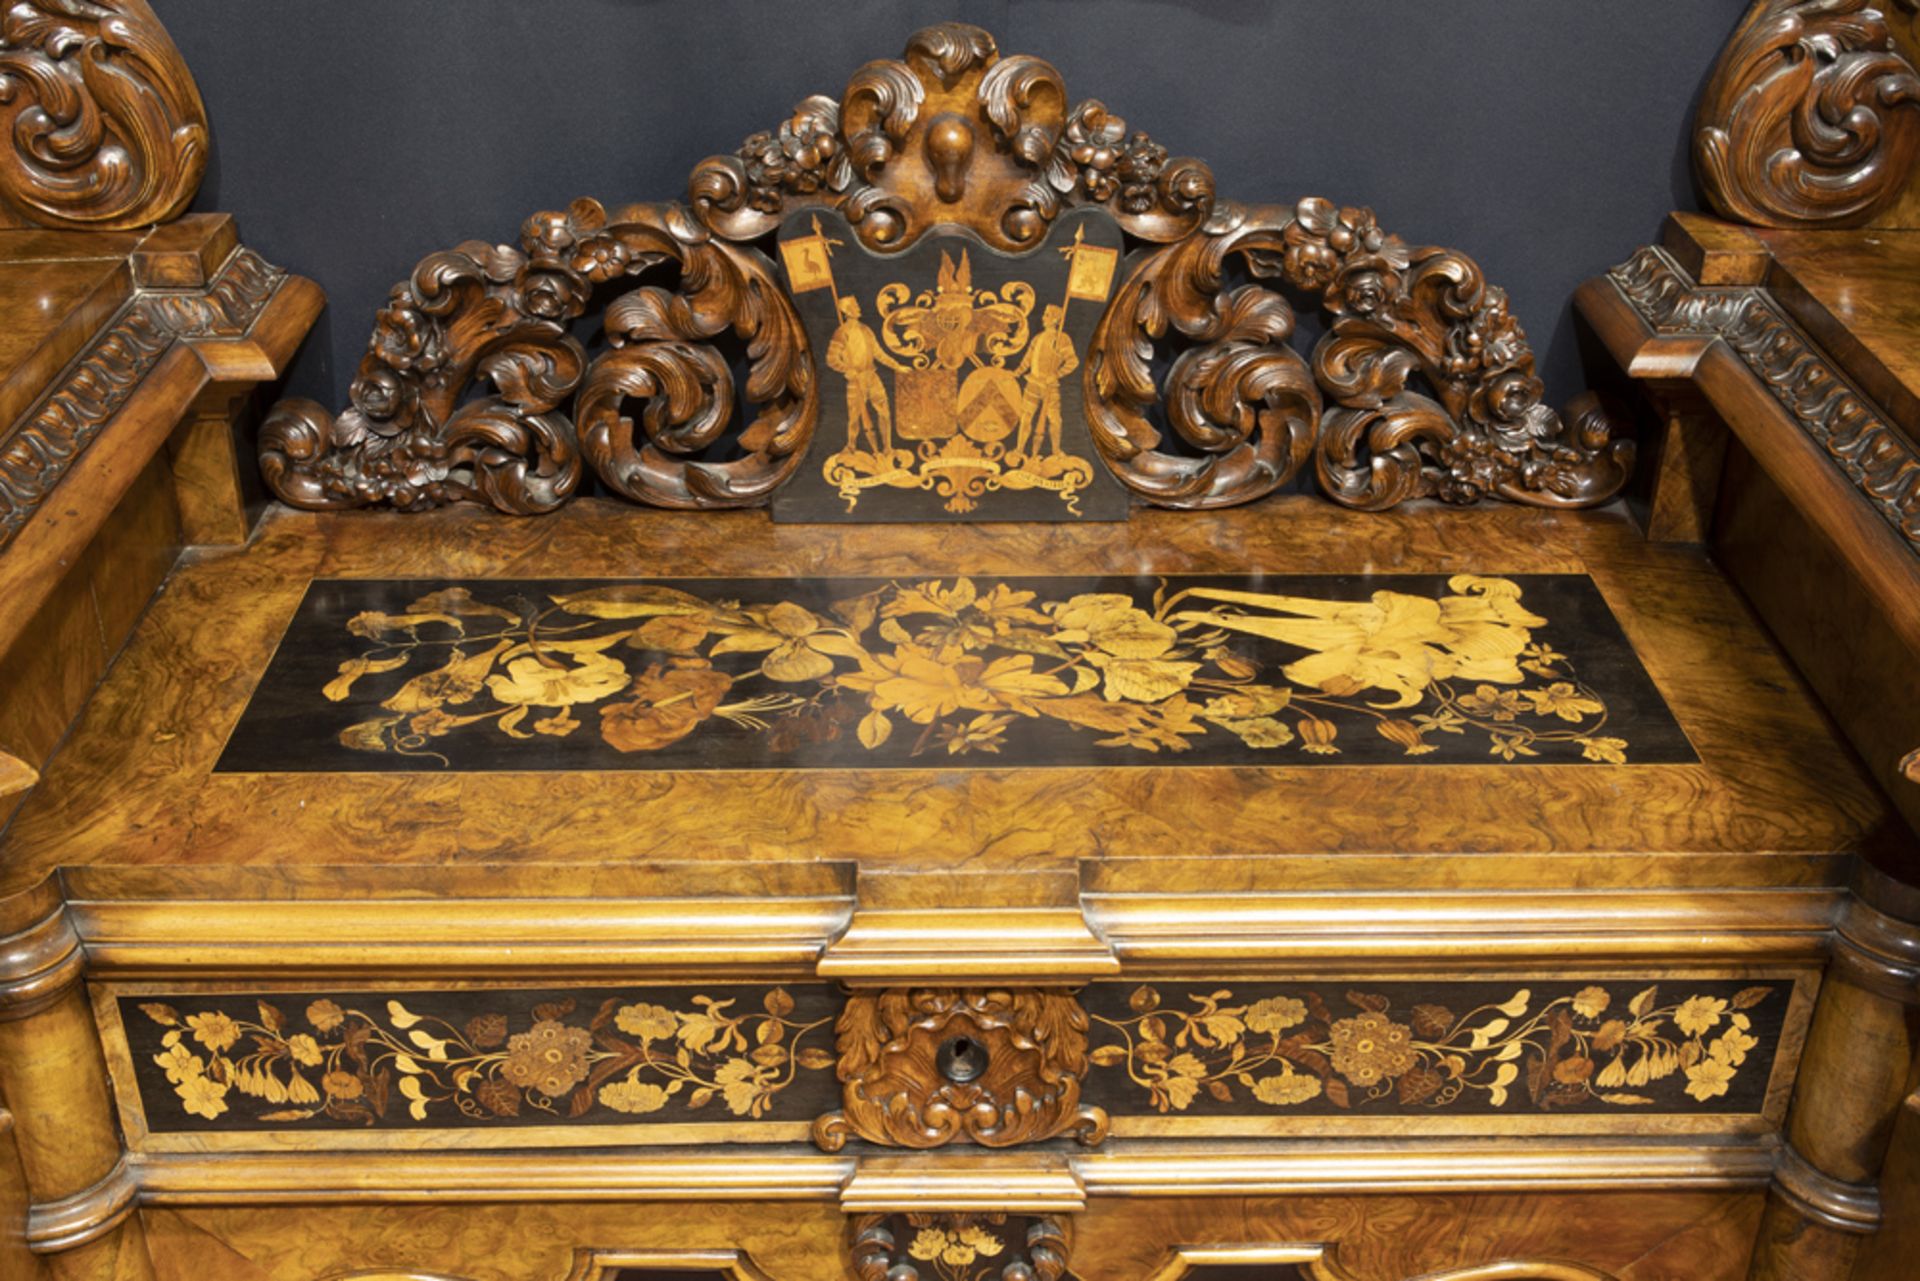 beautiful mid 19th Cent. Belgian dresser from Malines in walnut, burr of walnut and marquetry with - Image 7 of 10